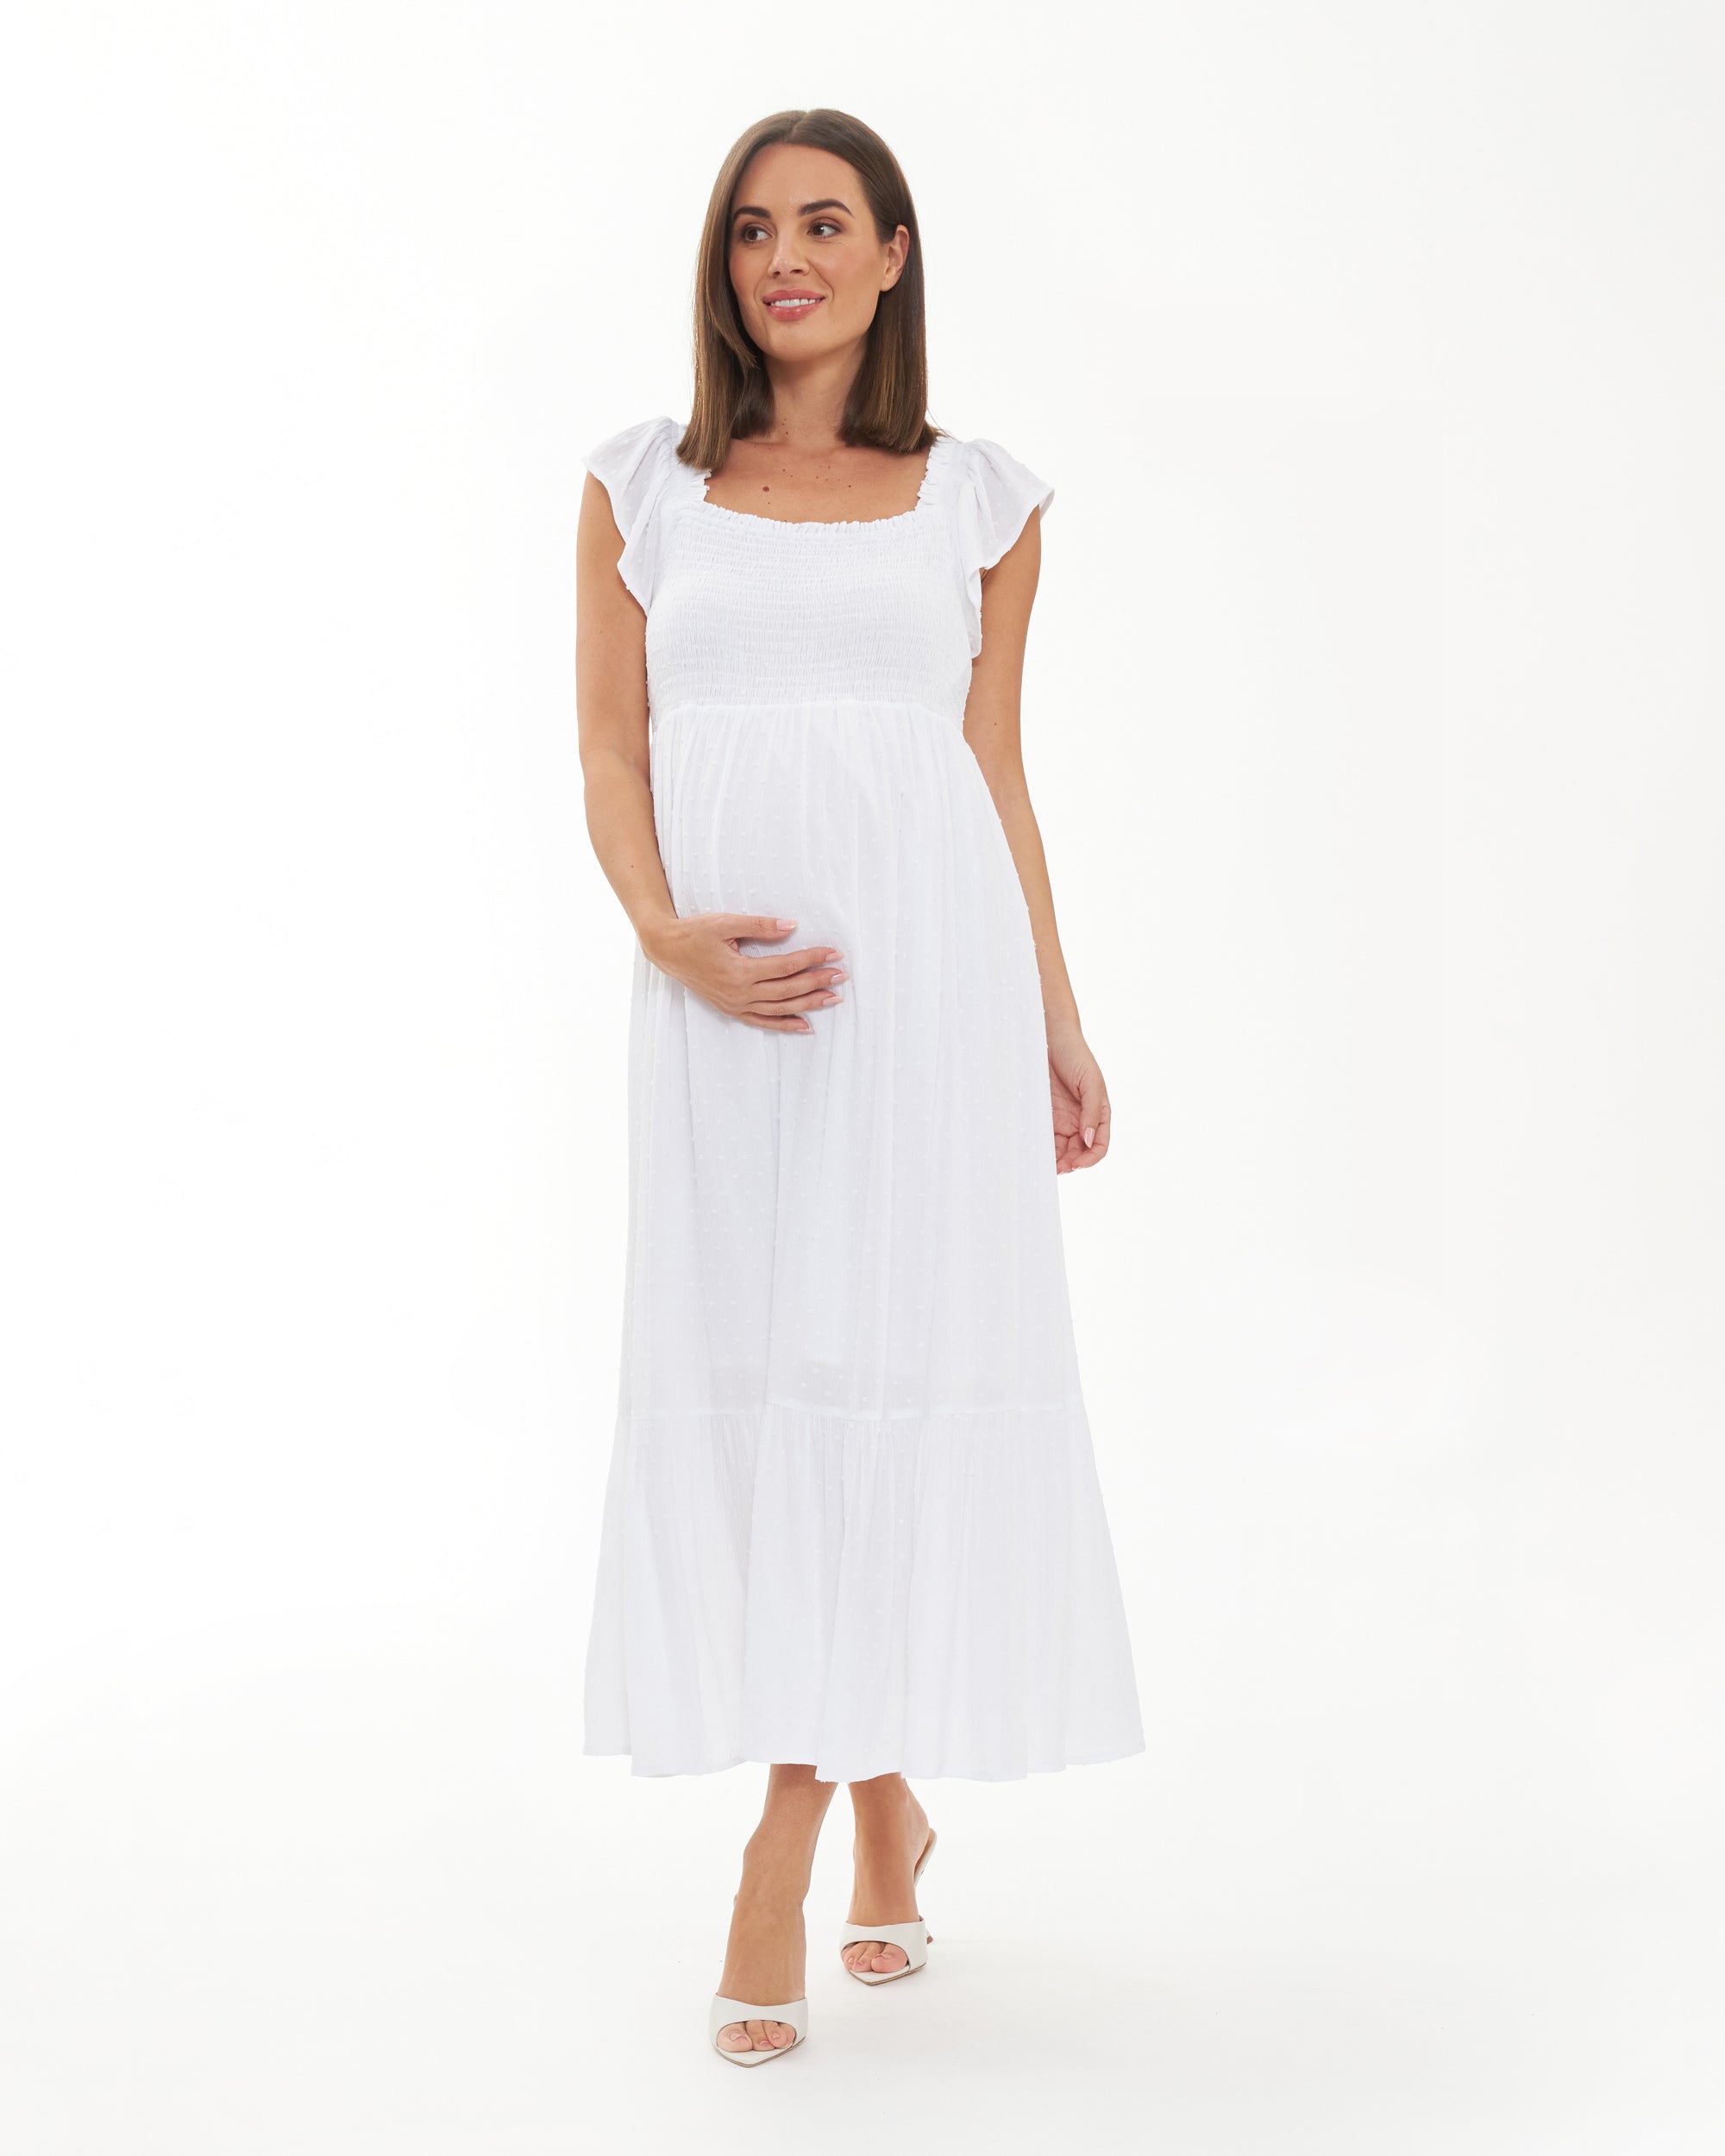 Ripe Maternity - What's your closest @ripematernity store